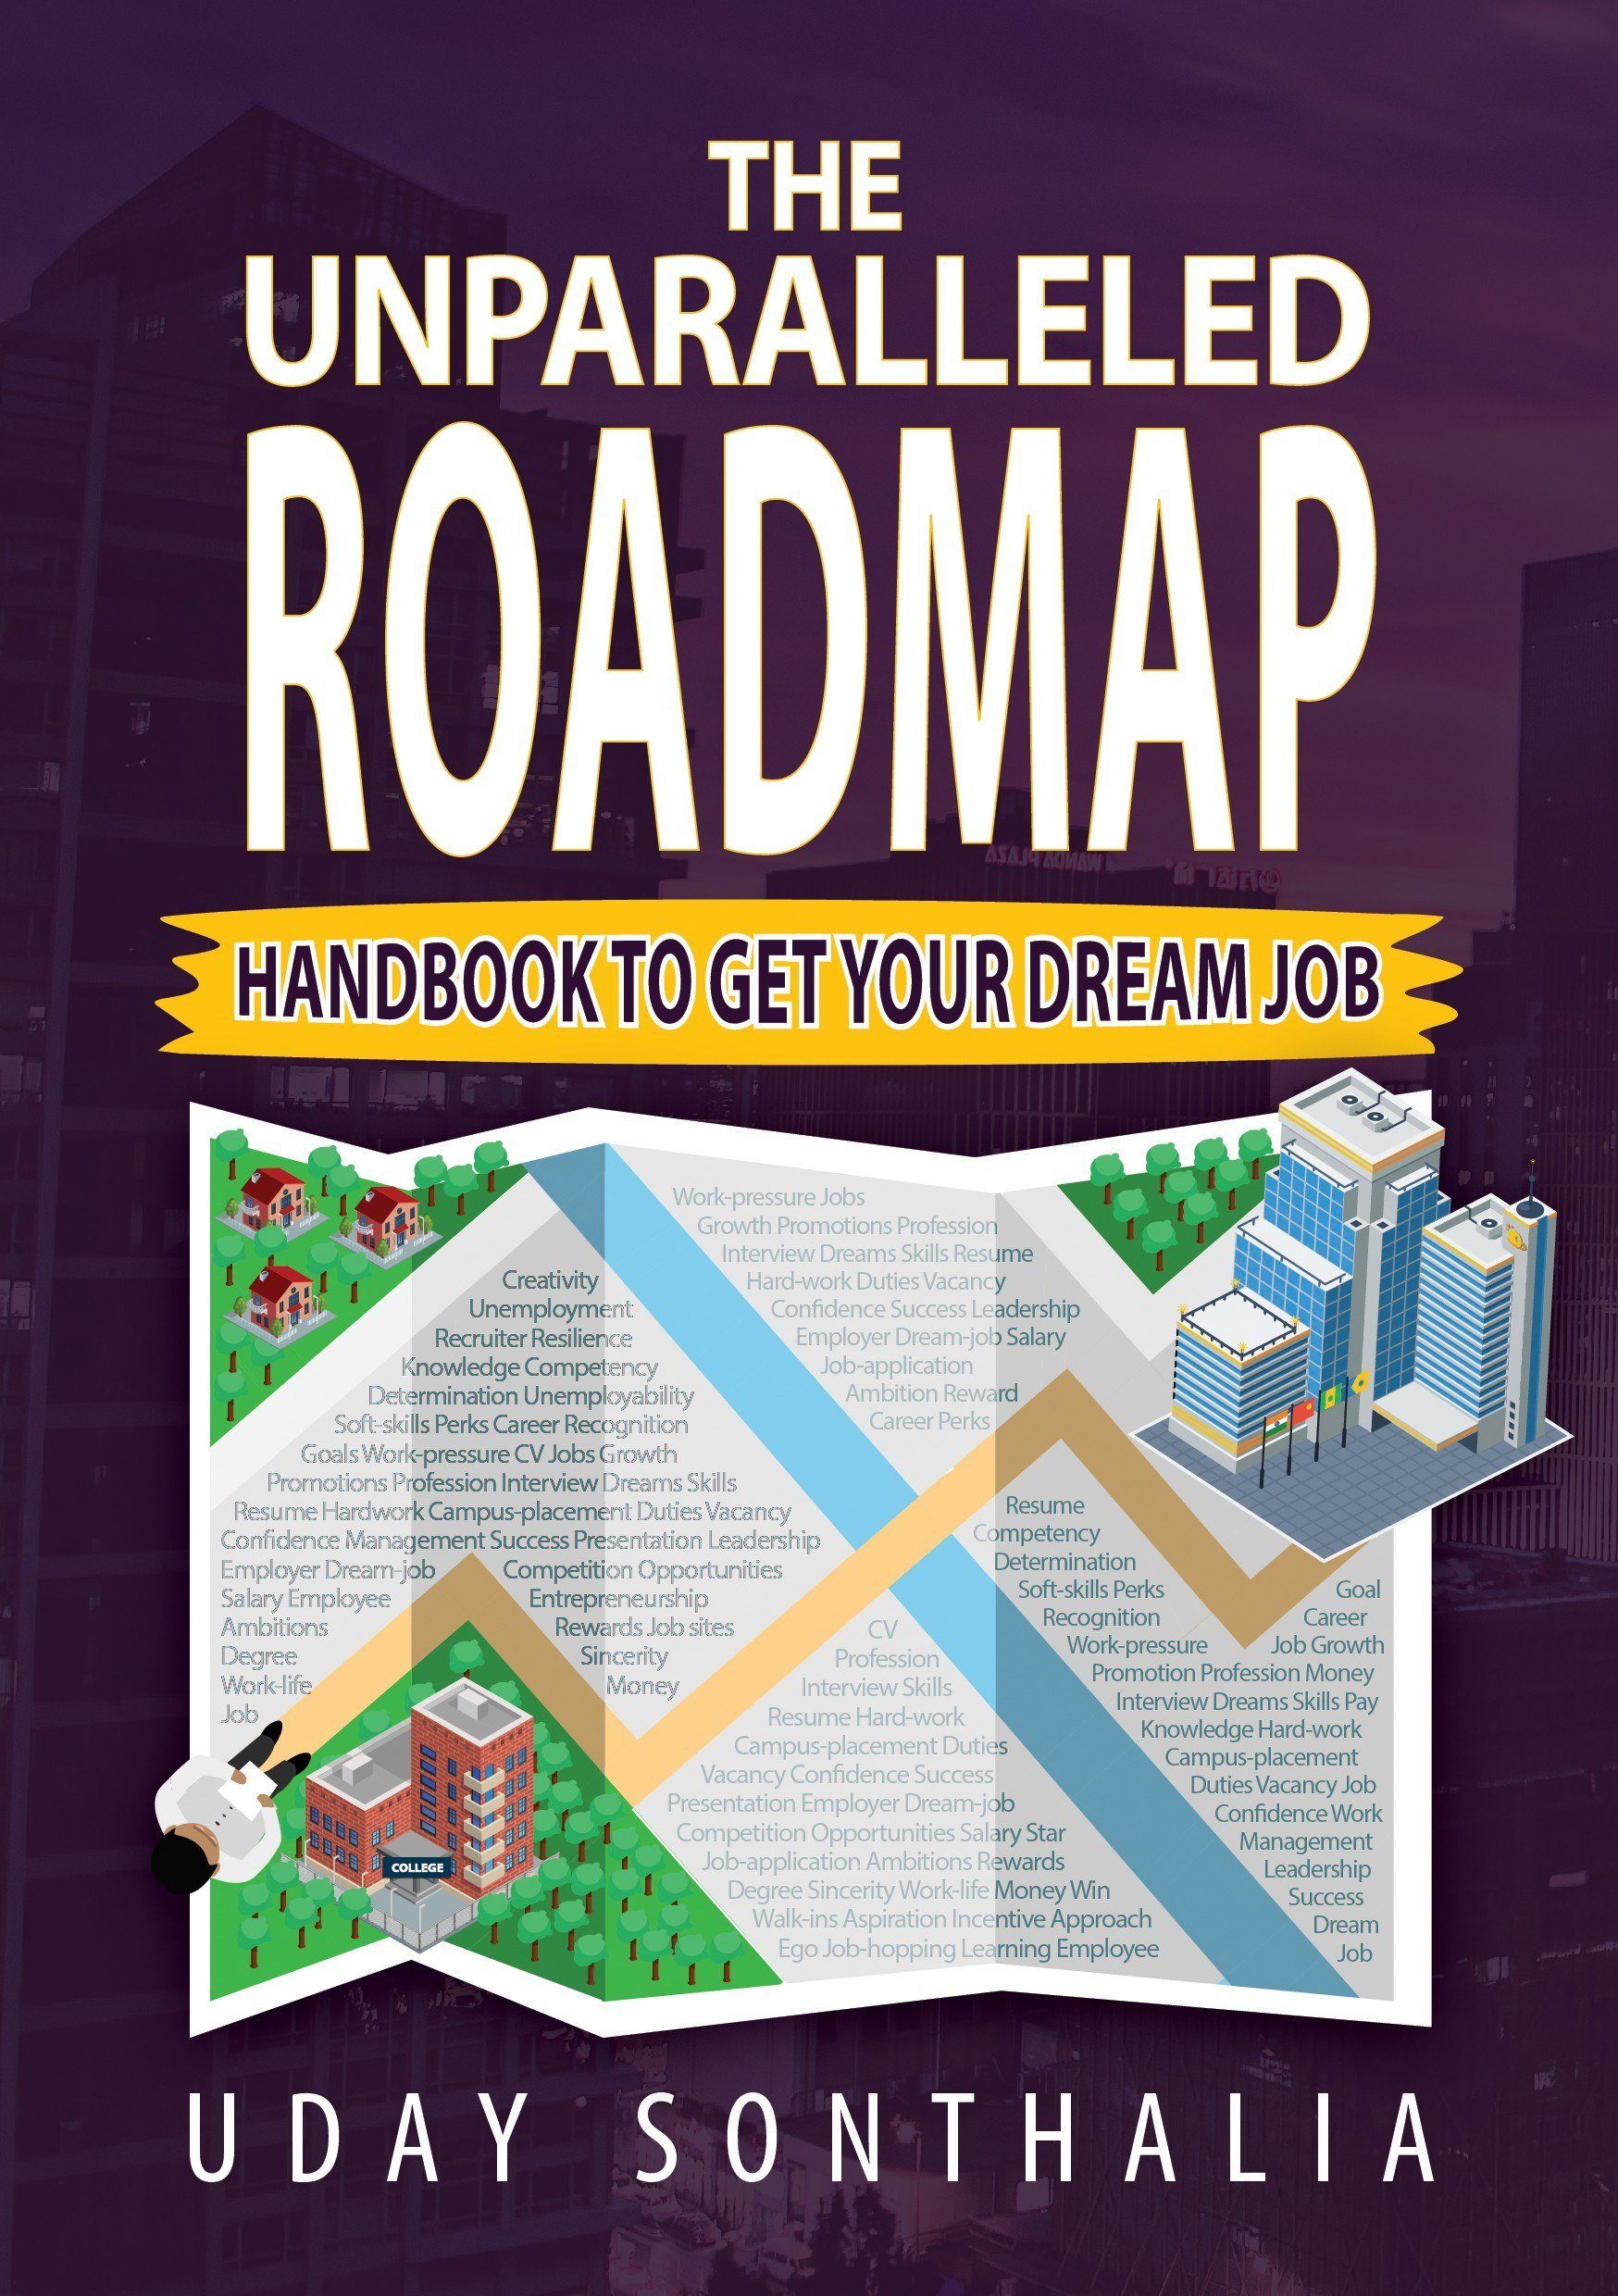 THE UNPARALLELED ROADMAP: Handbook to get your dream job | Uday Sonthalia